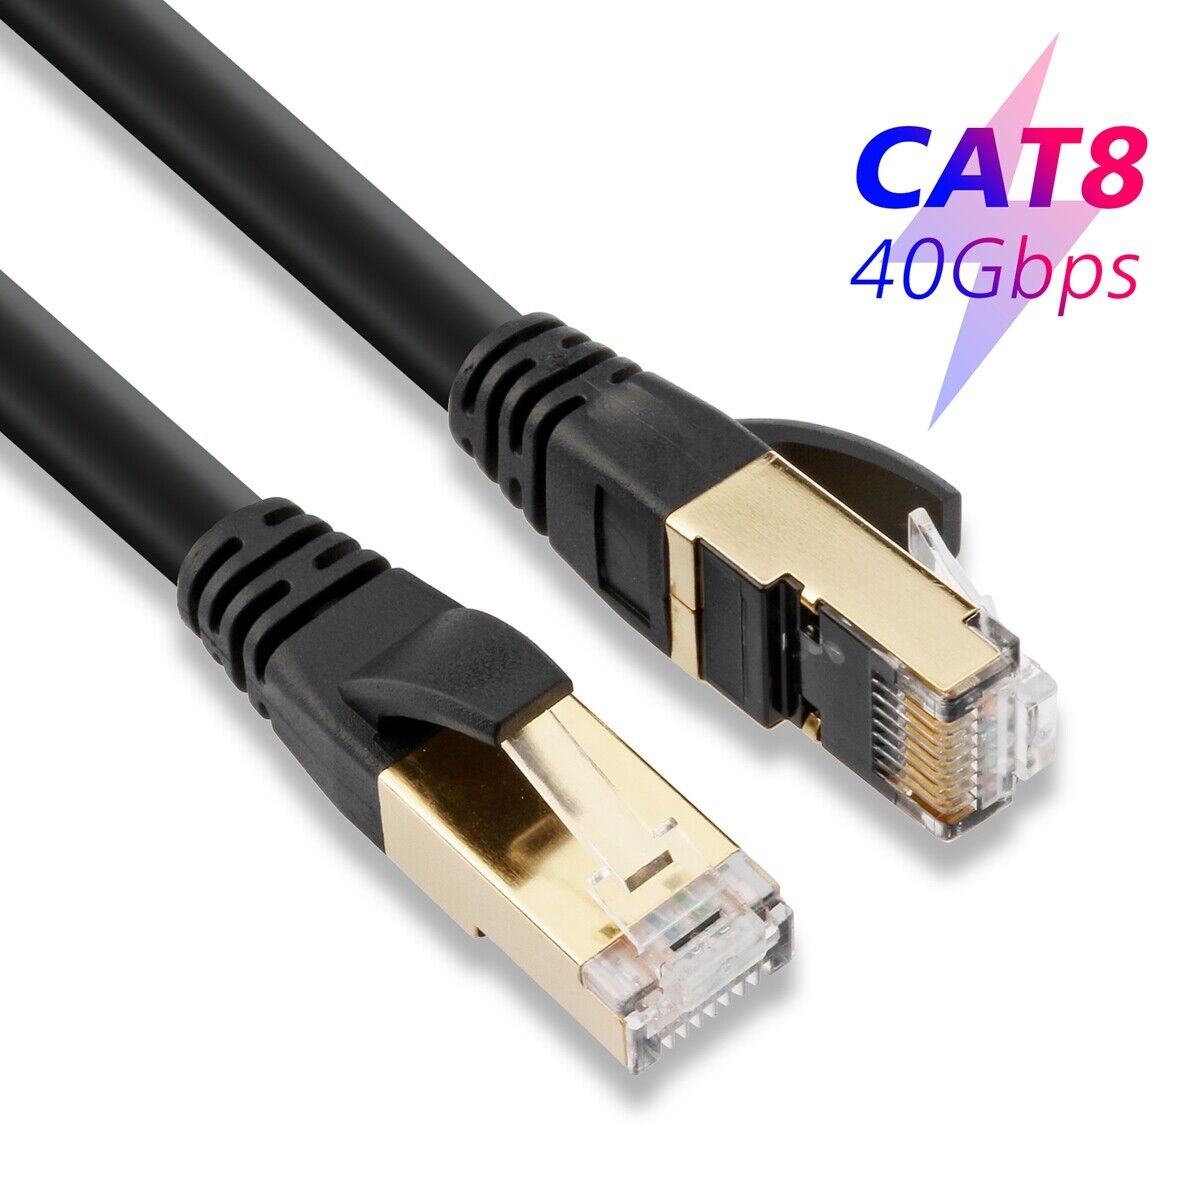 40Gbps Ethernet Cable Cat8 Home Router High-Speed Network Internet 6 Feet Lot US